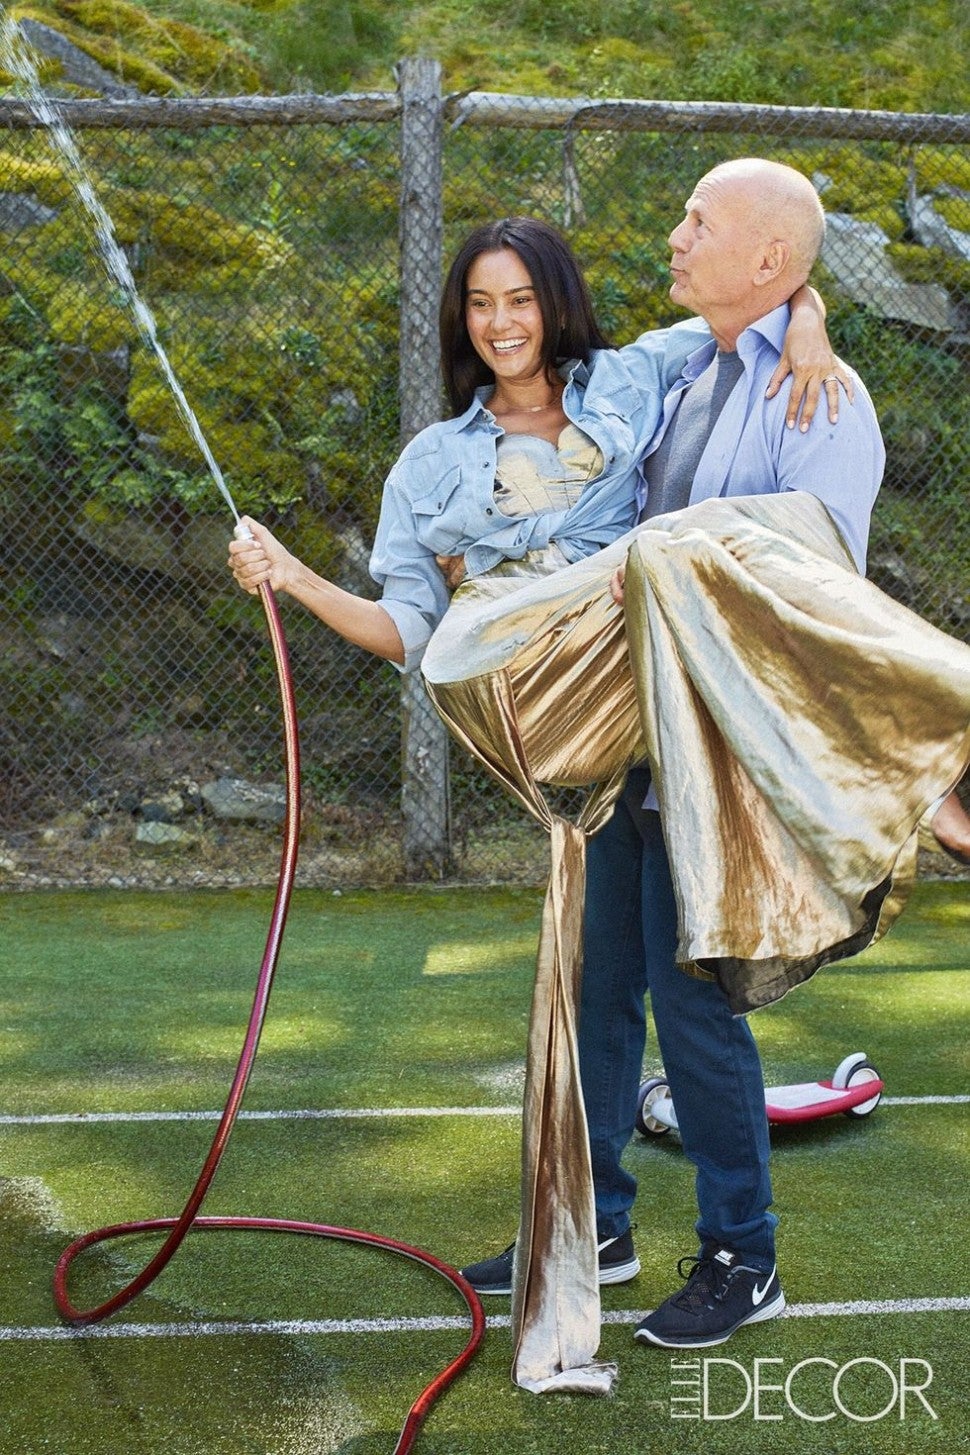 Bruce Willis at home with wife Emma, Elle Decor